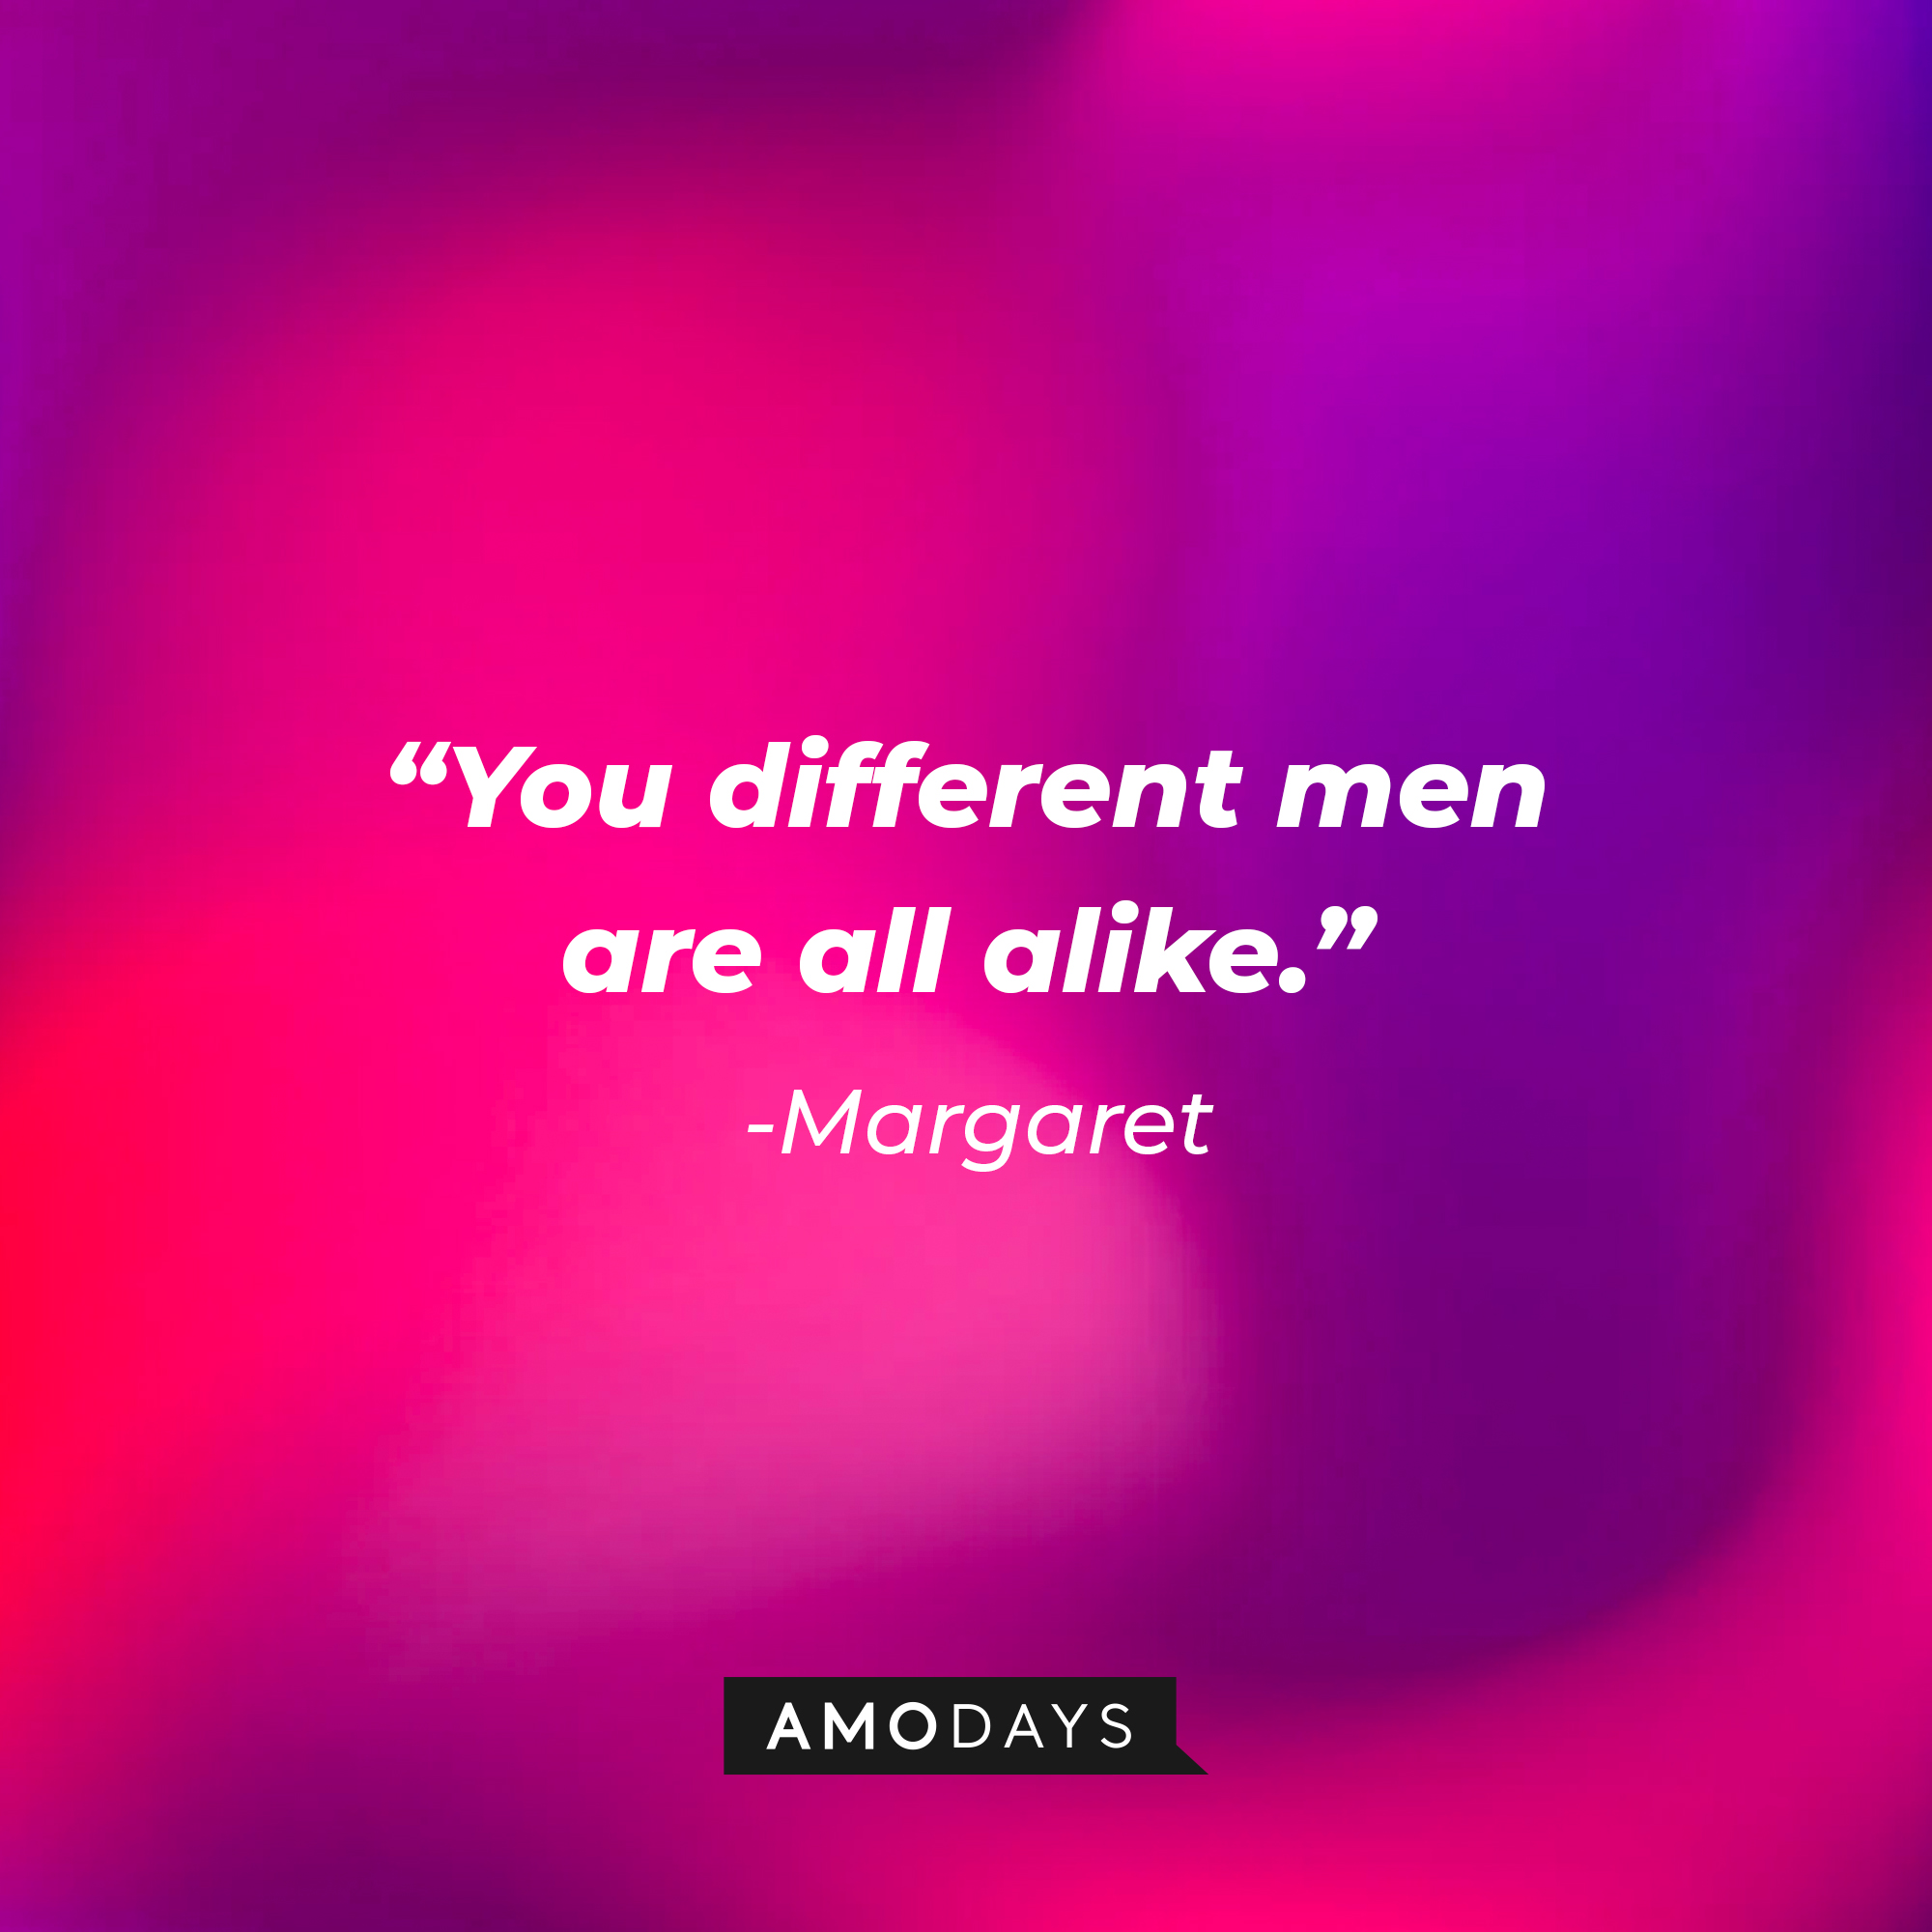 Margaret’s quote: “You different men are all alike.” | Source: AmoDays